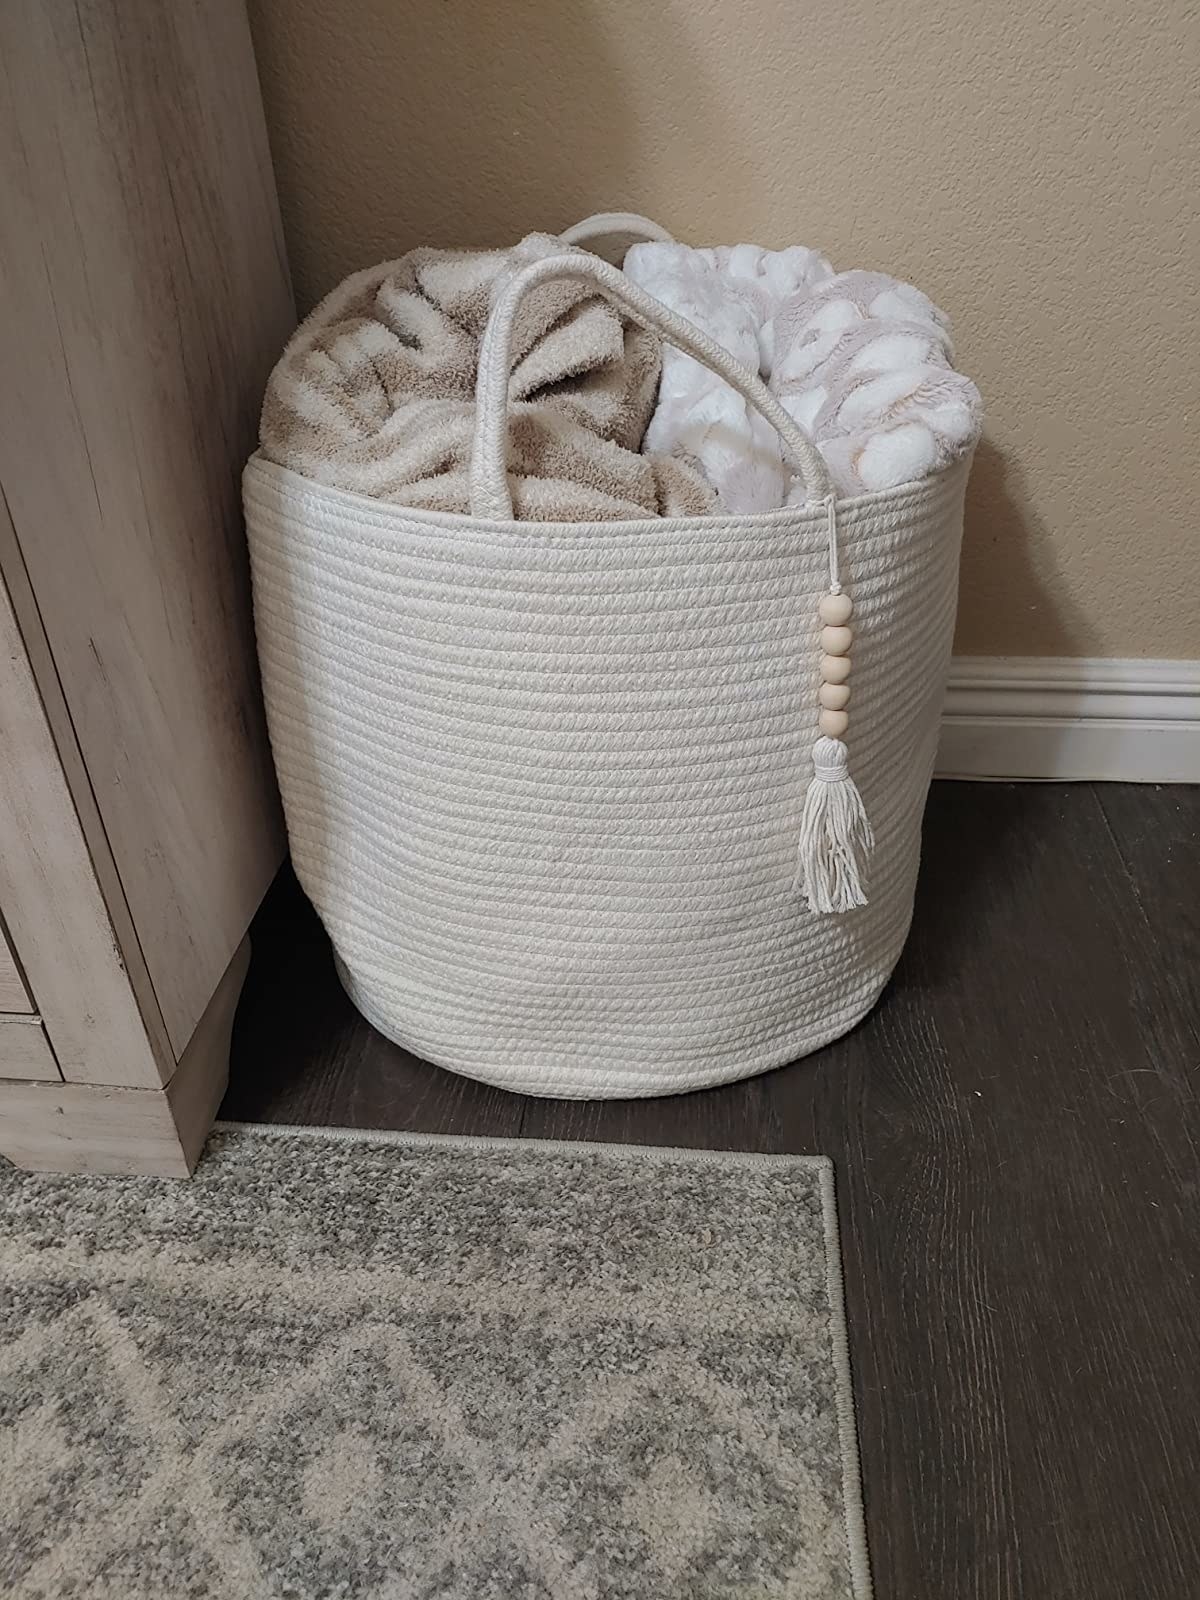 Reviewer image of the basket with blankets in it